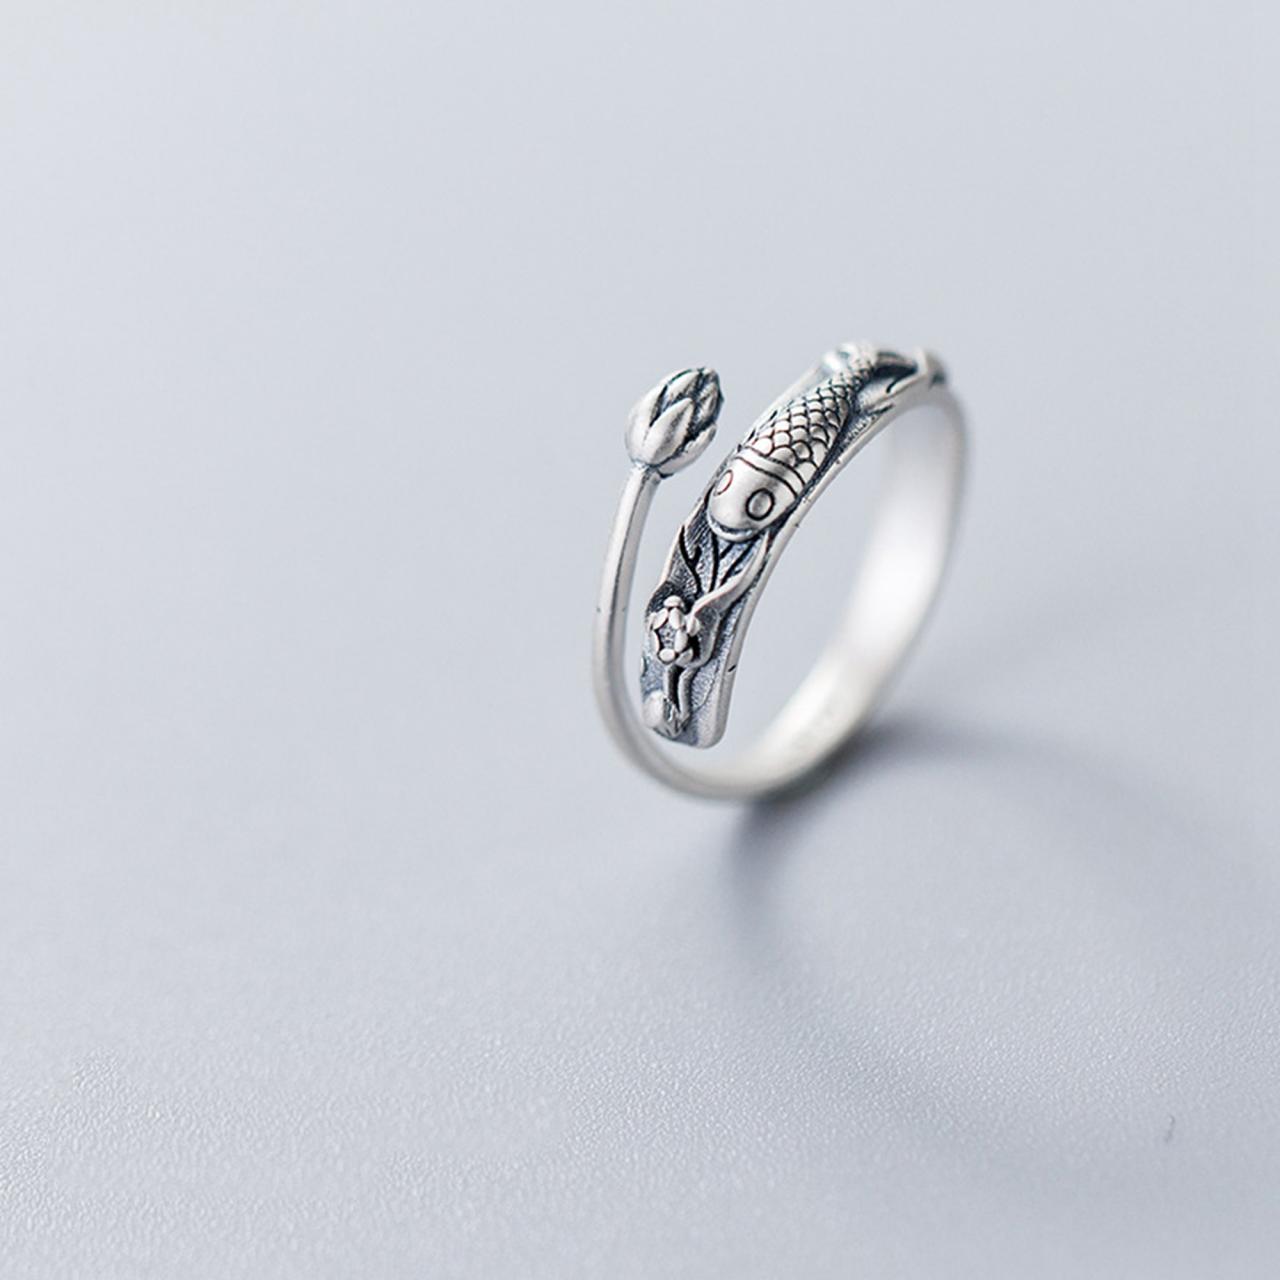 Sterling Silver Adjustable Carp Ring, Minimalist Rings, Dainty Ring, Women Ring, Everyday Jewelry